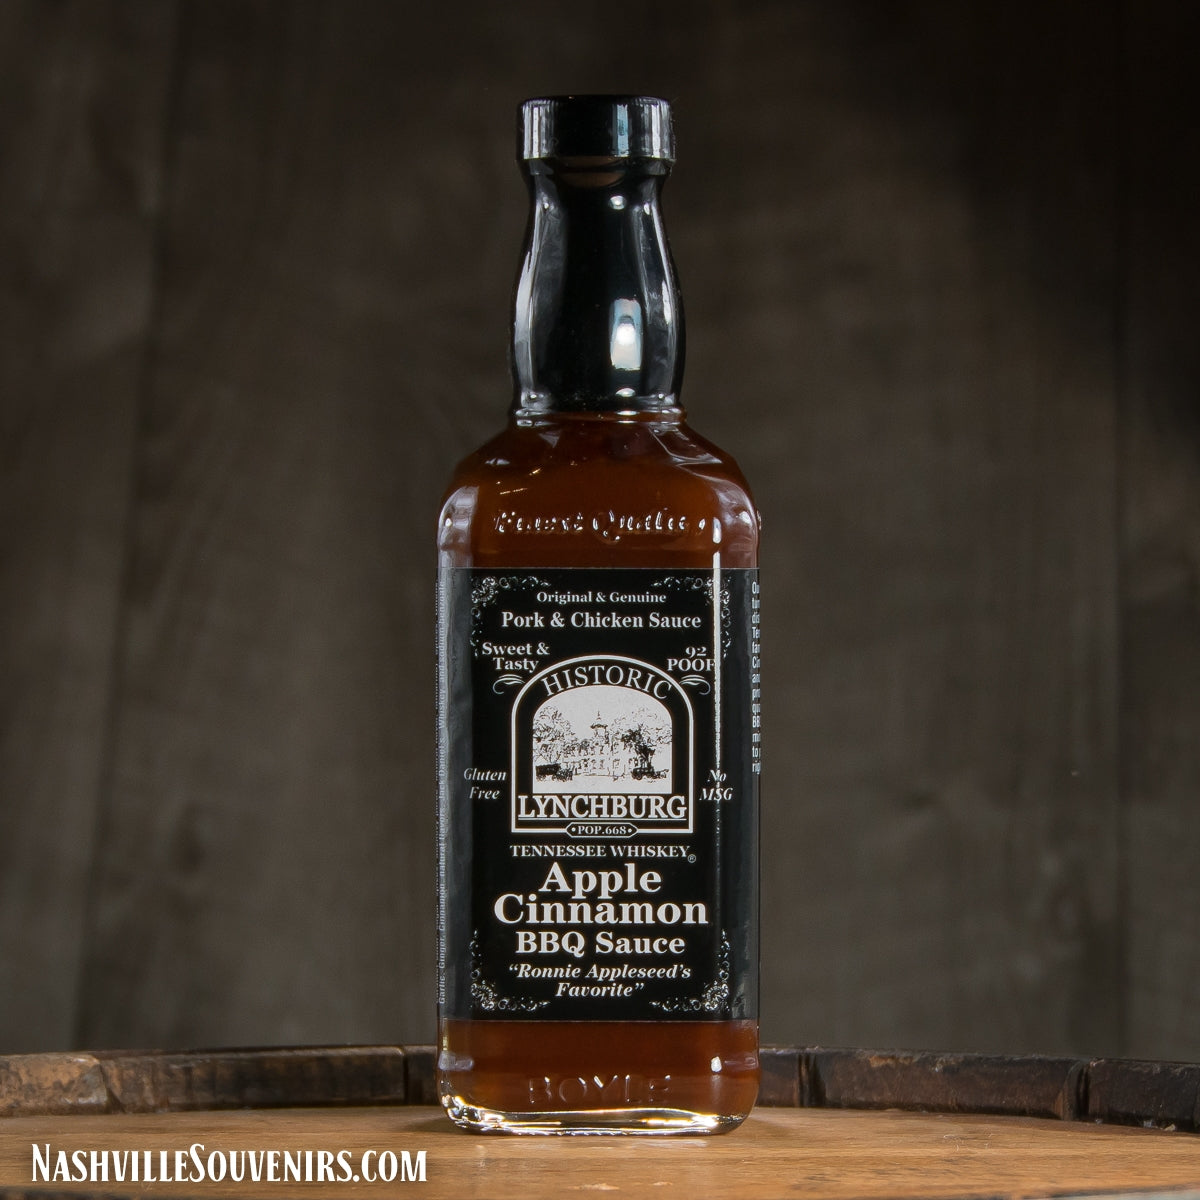 Buy Historic Lynchburg Apple Cinnamon BBQ Sauce containing real Jack Daniels Black Label whiskey. FREE SHIPPING on all US orders over $75!